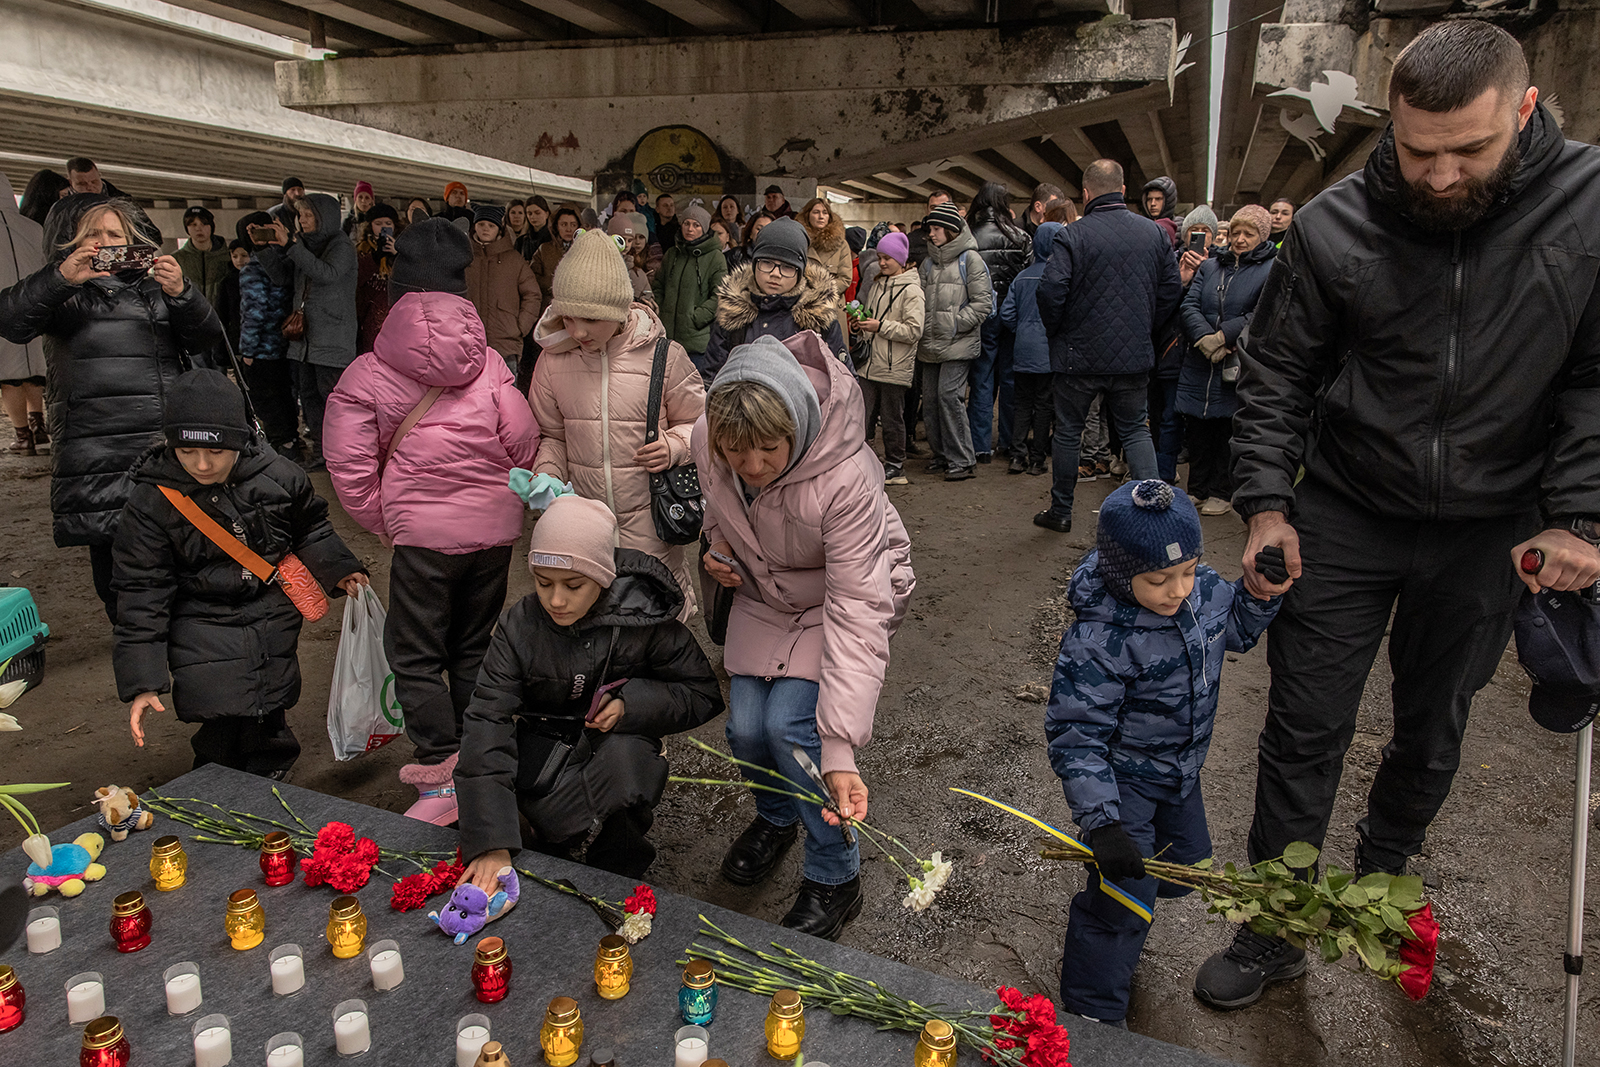 Residents attend a memorial in Irpin, Ukraine, on February 24.